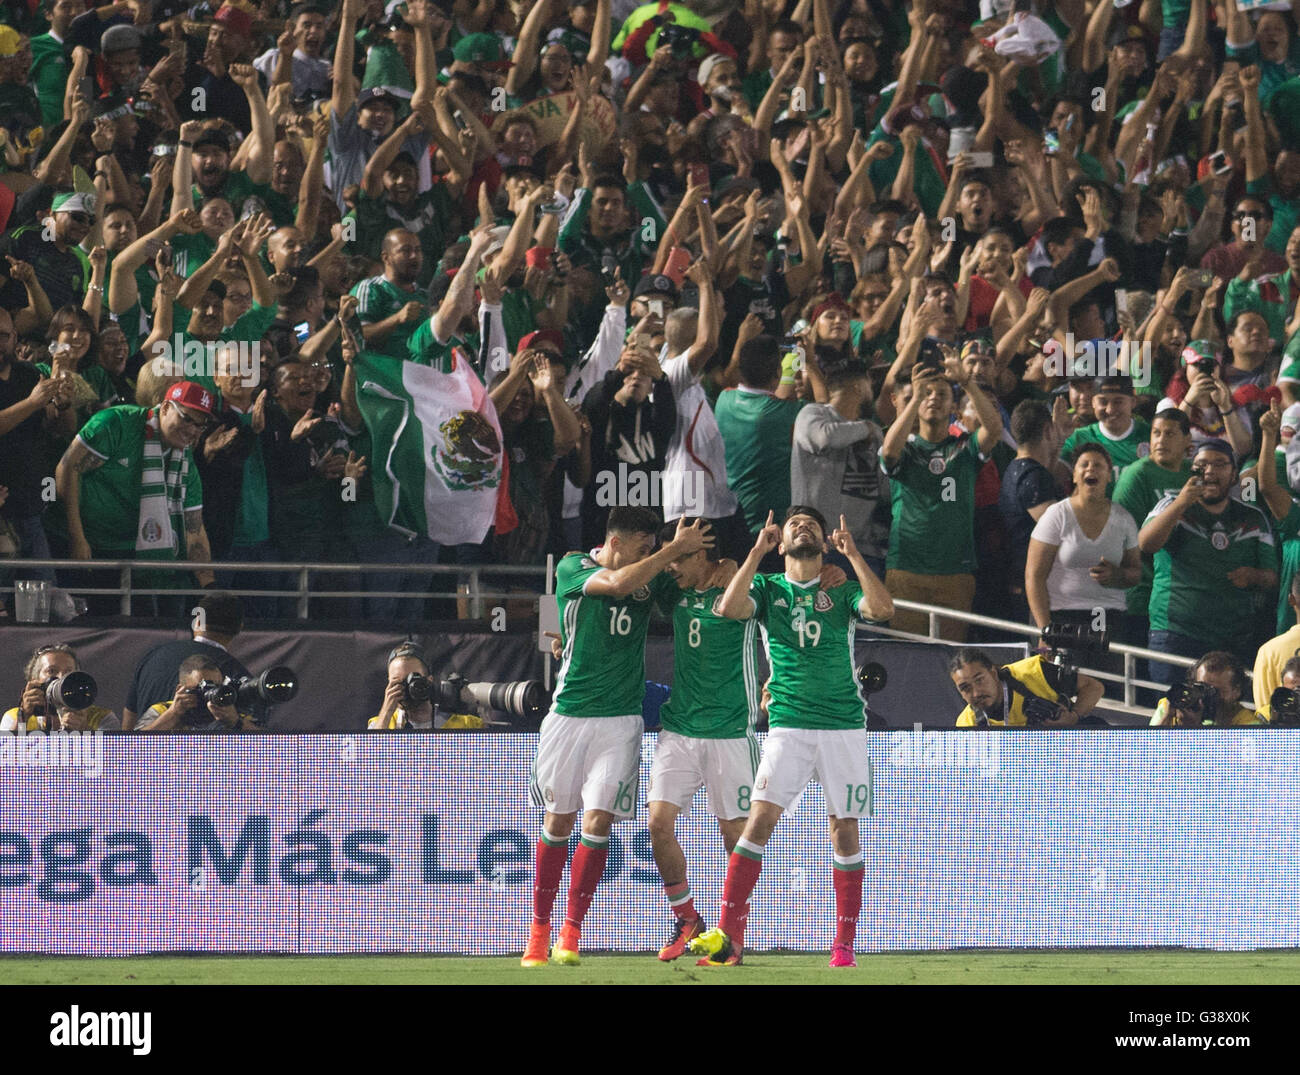 Pasadena, USA. 9th June, 2016. Mexico's Oribe Peralta (R) celebrates after scoring during the Copa America Centenario tournament Group C football match between Mexico and Jamaica in Pasadena, California, the United States, on June 9, 2016. Credit:  Yang Lei/Xinhua/Alamy Live News Stock Photo